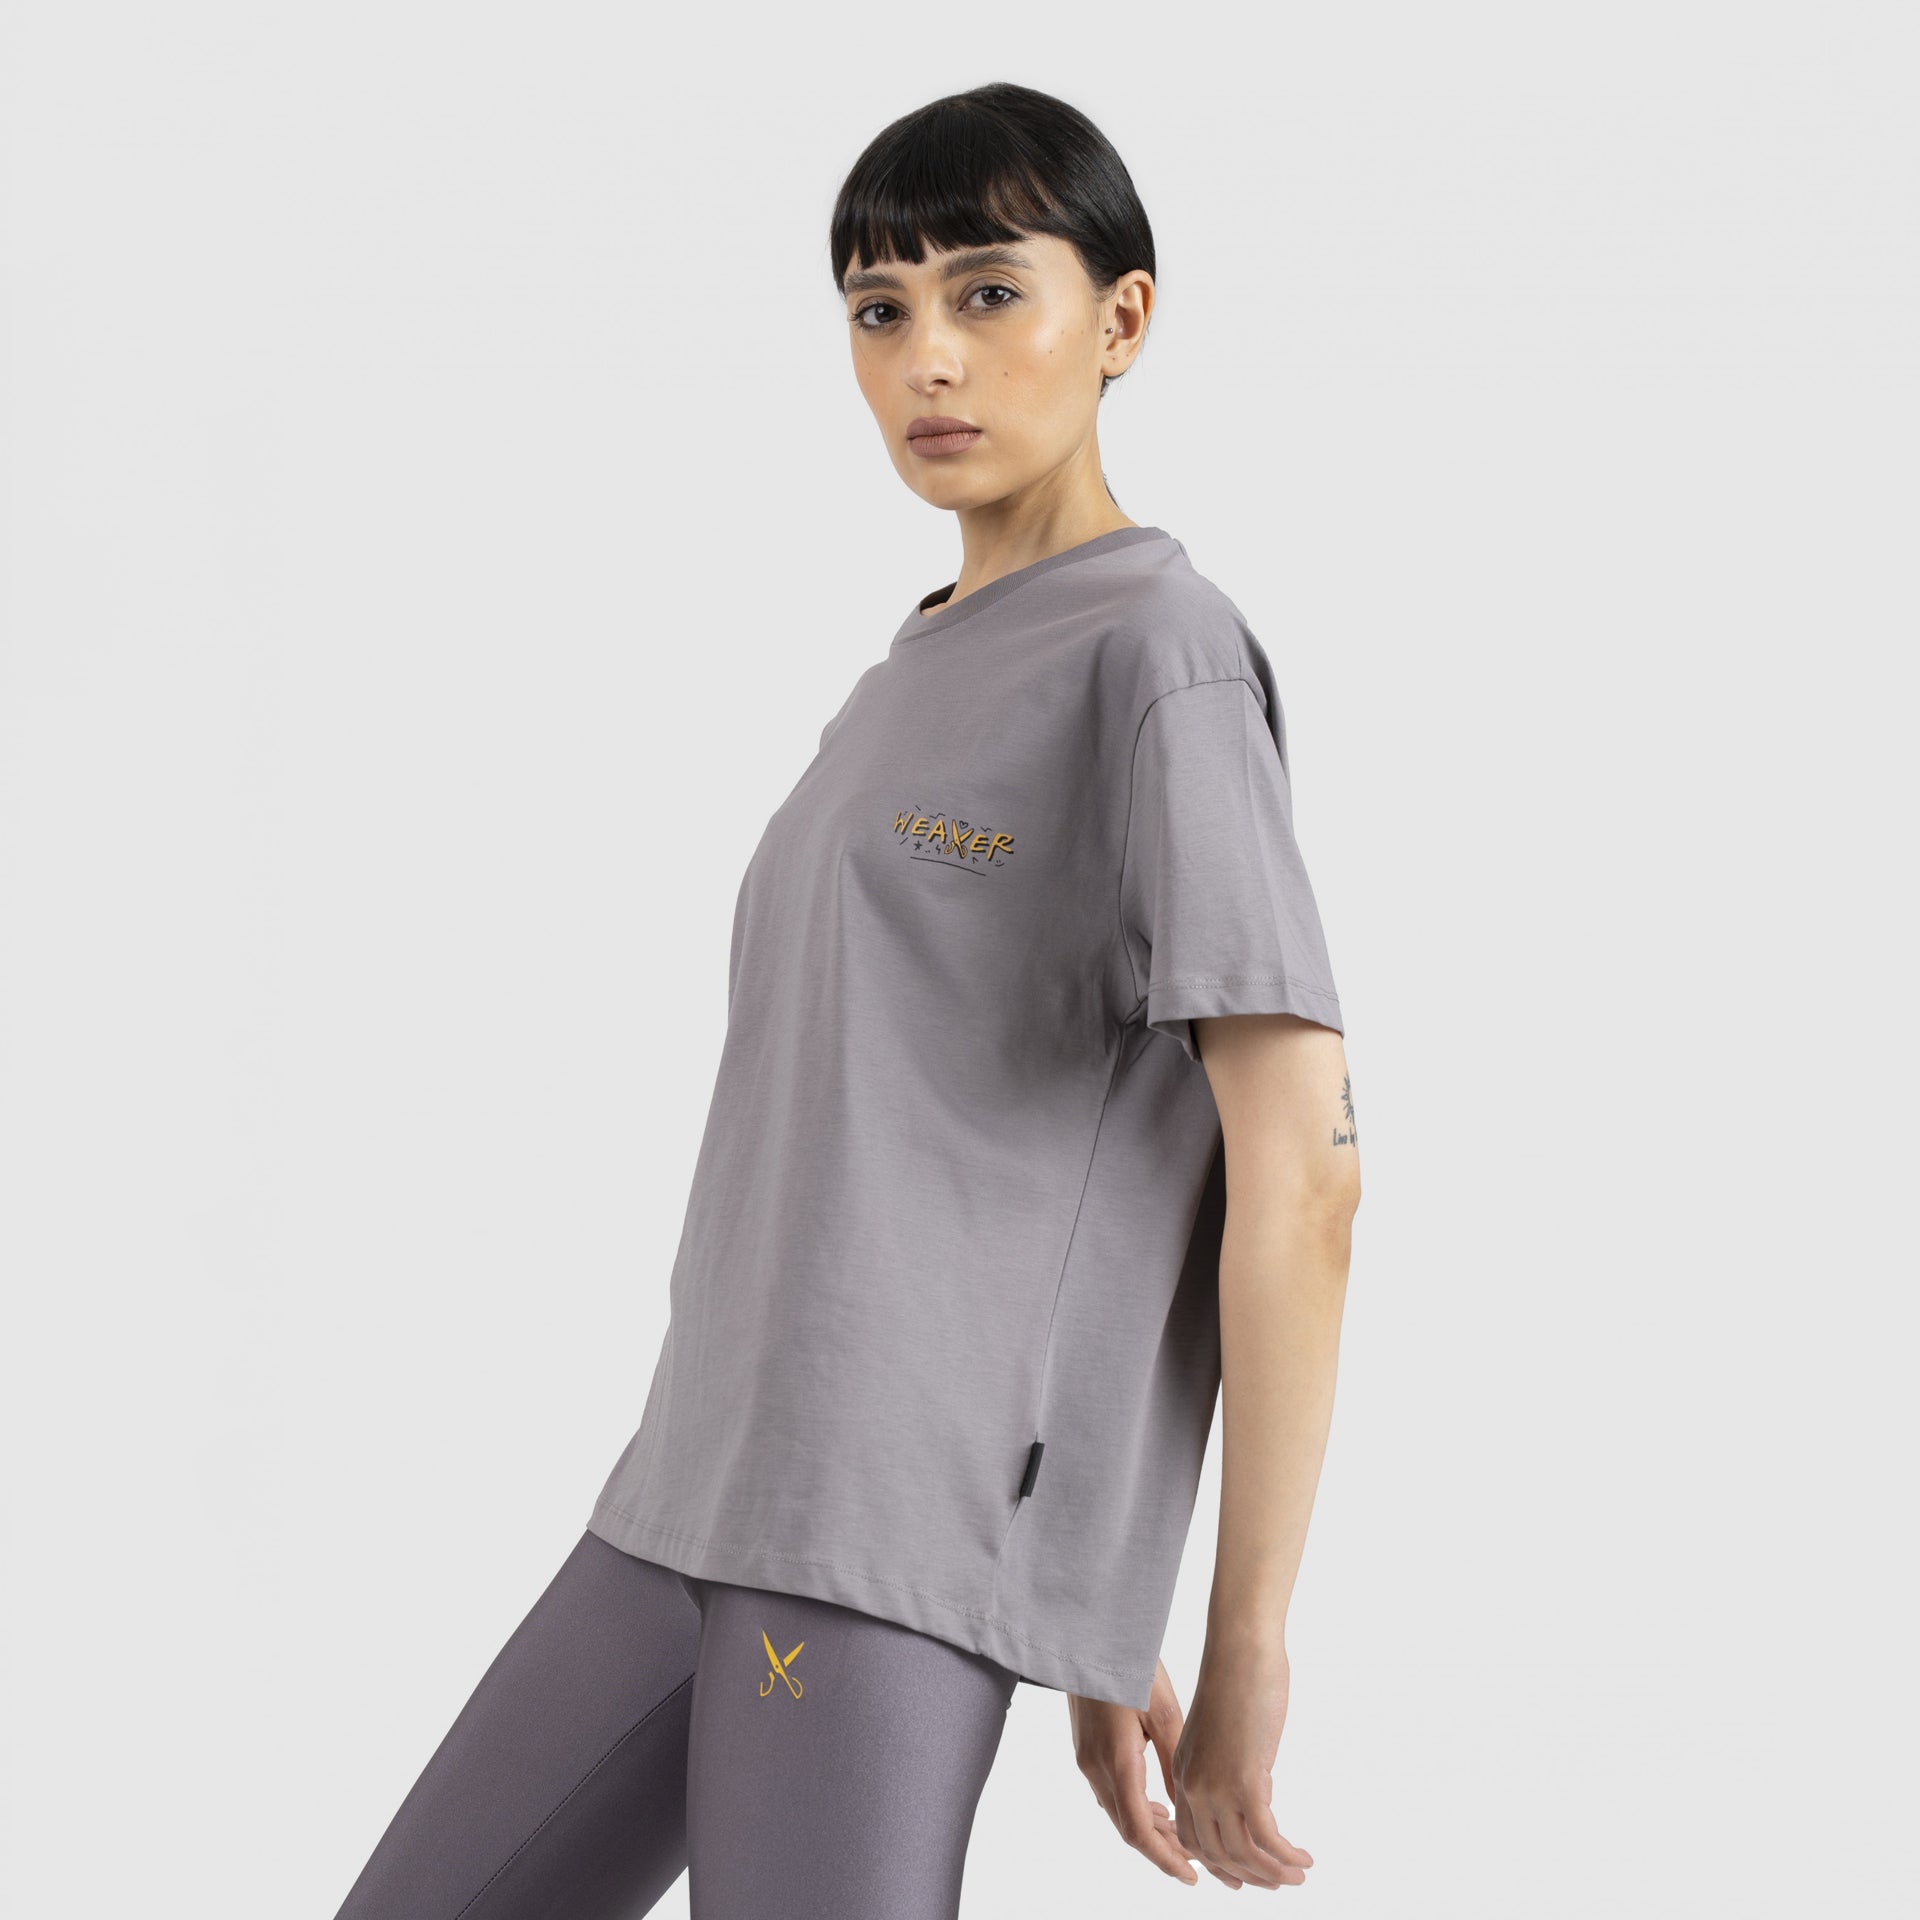 Gray Classic T-Shirt From Weaver Design